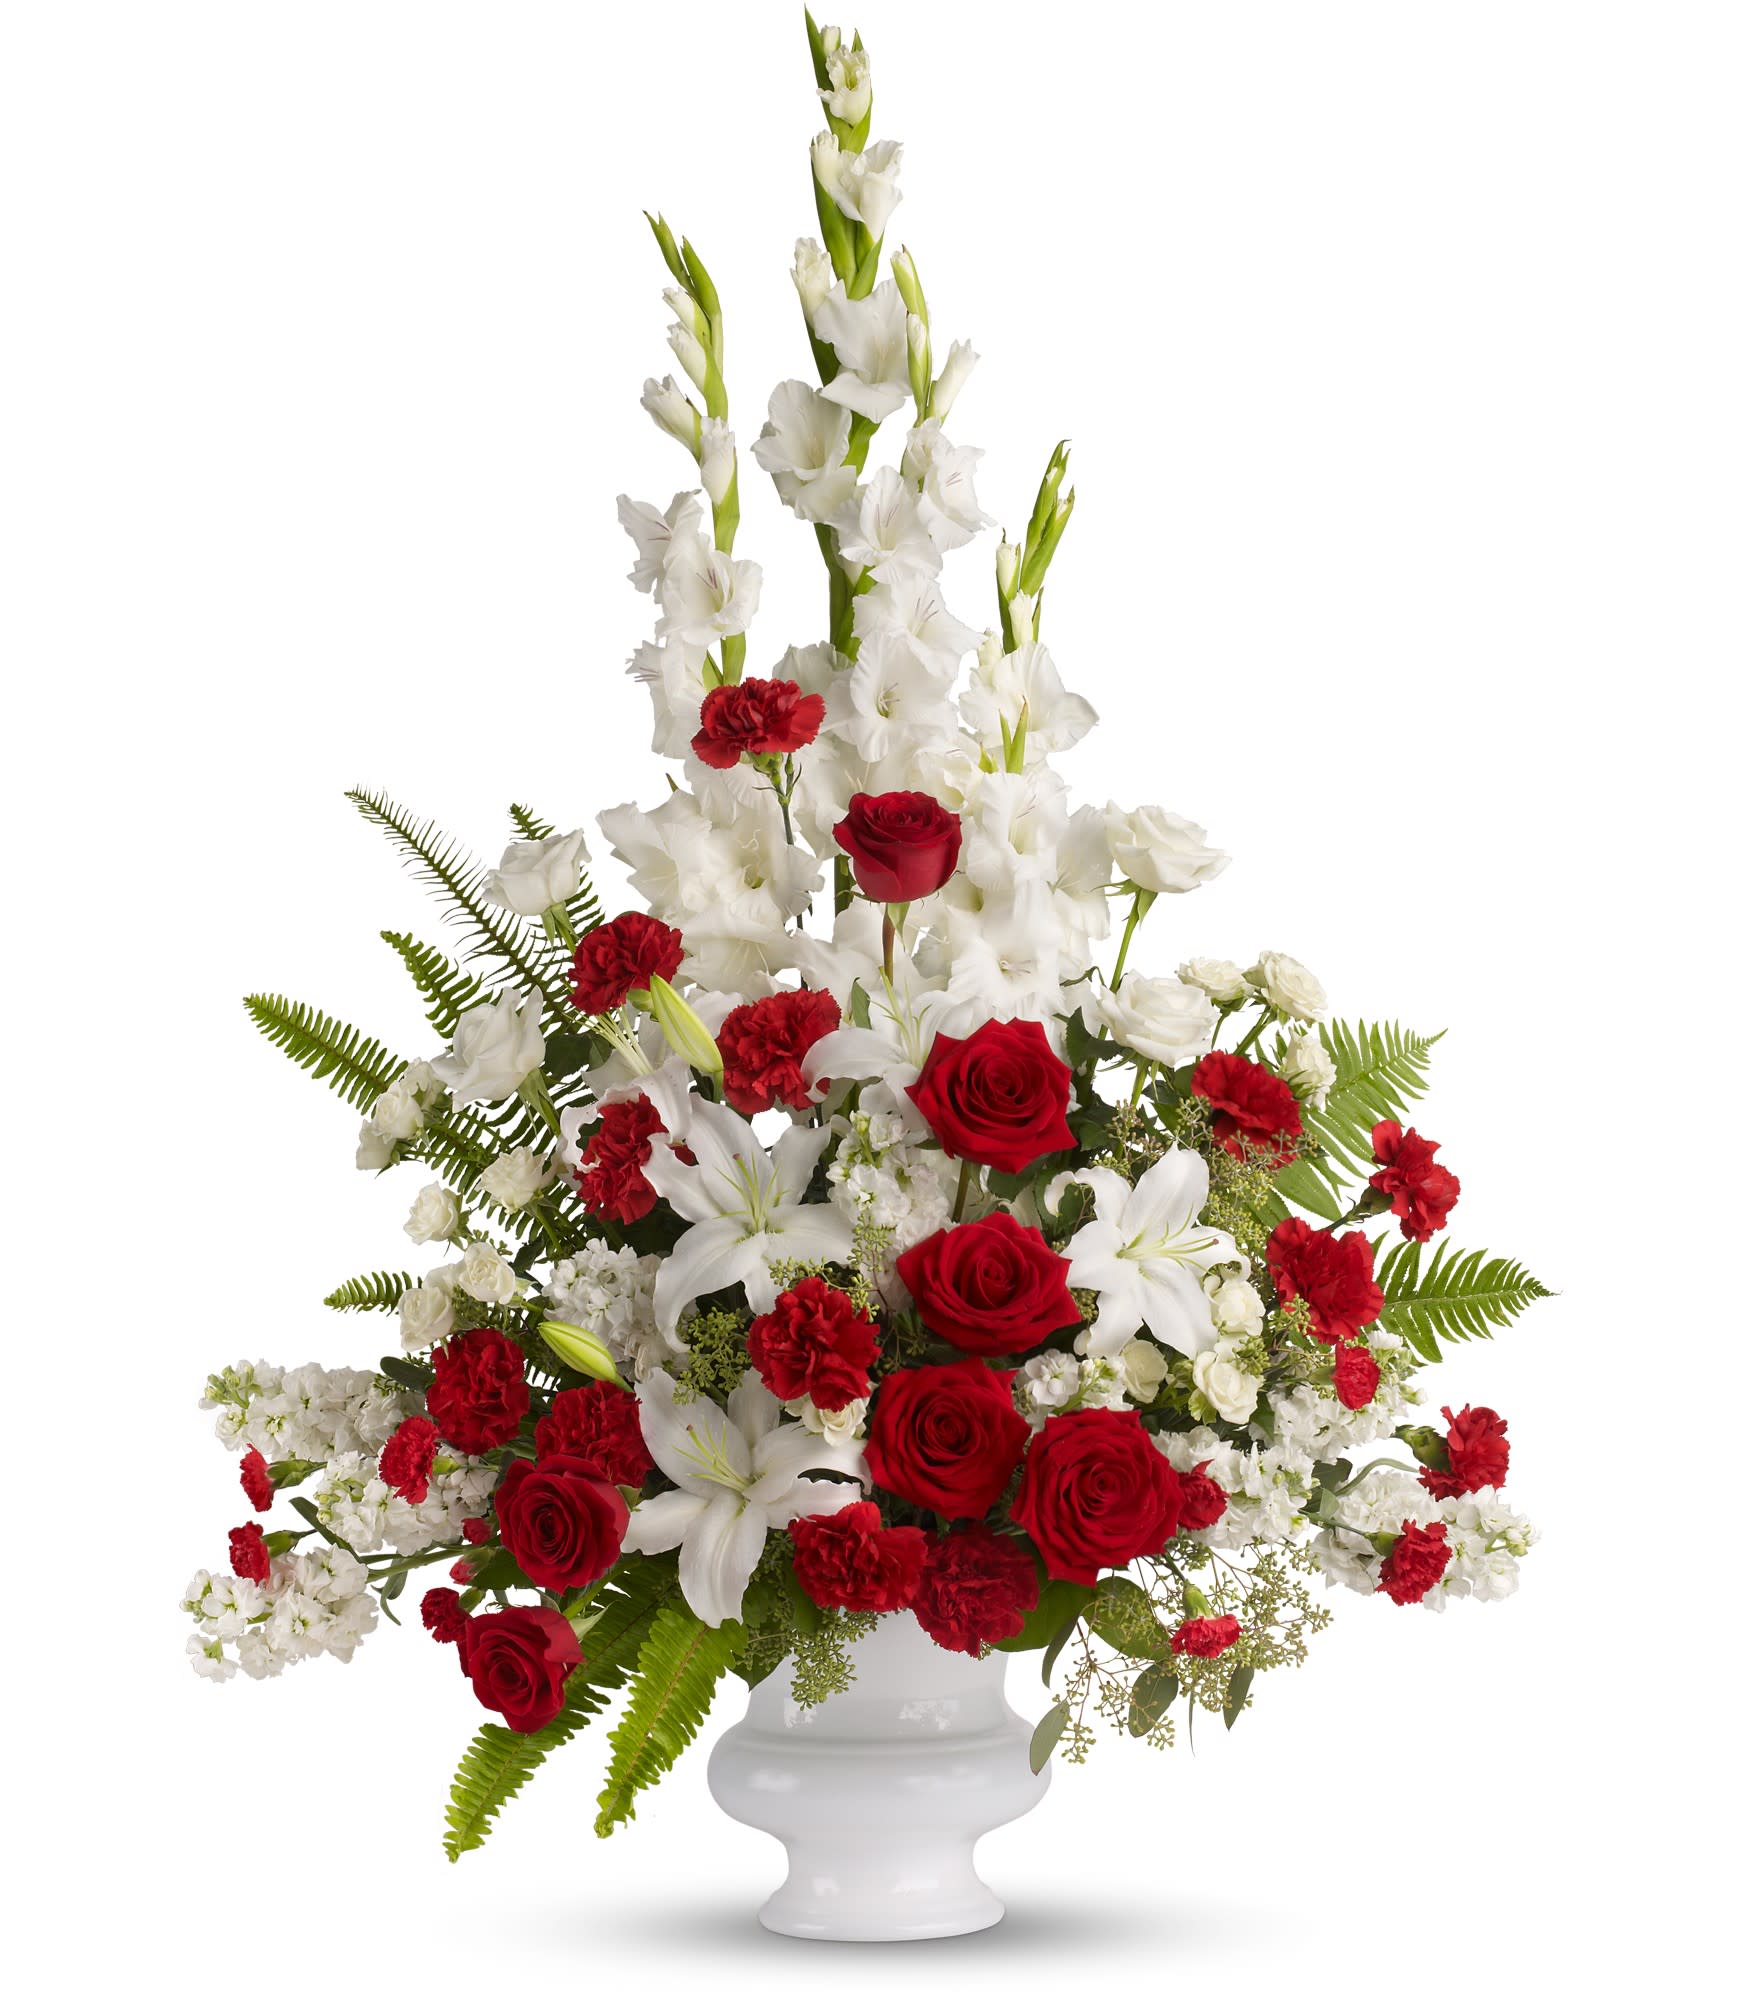 Memories to Treasure - For the sweet spirits who touch our lives, a classic pairing of red and white that is both vibrant and respectful. Beautifully contained in a white urn.  PLEASE NOTE: Florist reserves the right to make modifications to the design based on seasonality and accessibility of blooms and vases. Any modifications made will honor the palette, intent, and feeling of the pictured design. Contact floral designer directly with any specifications or concerns.